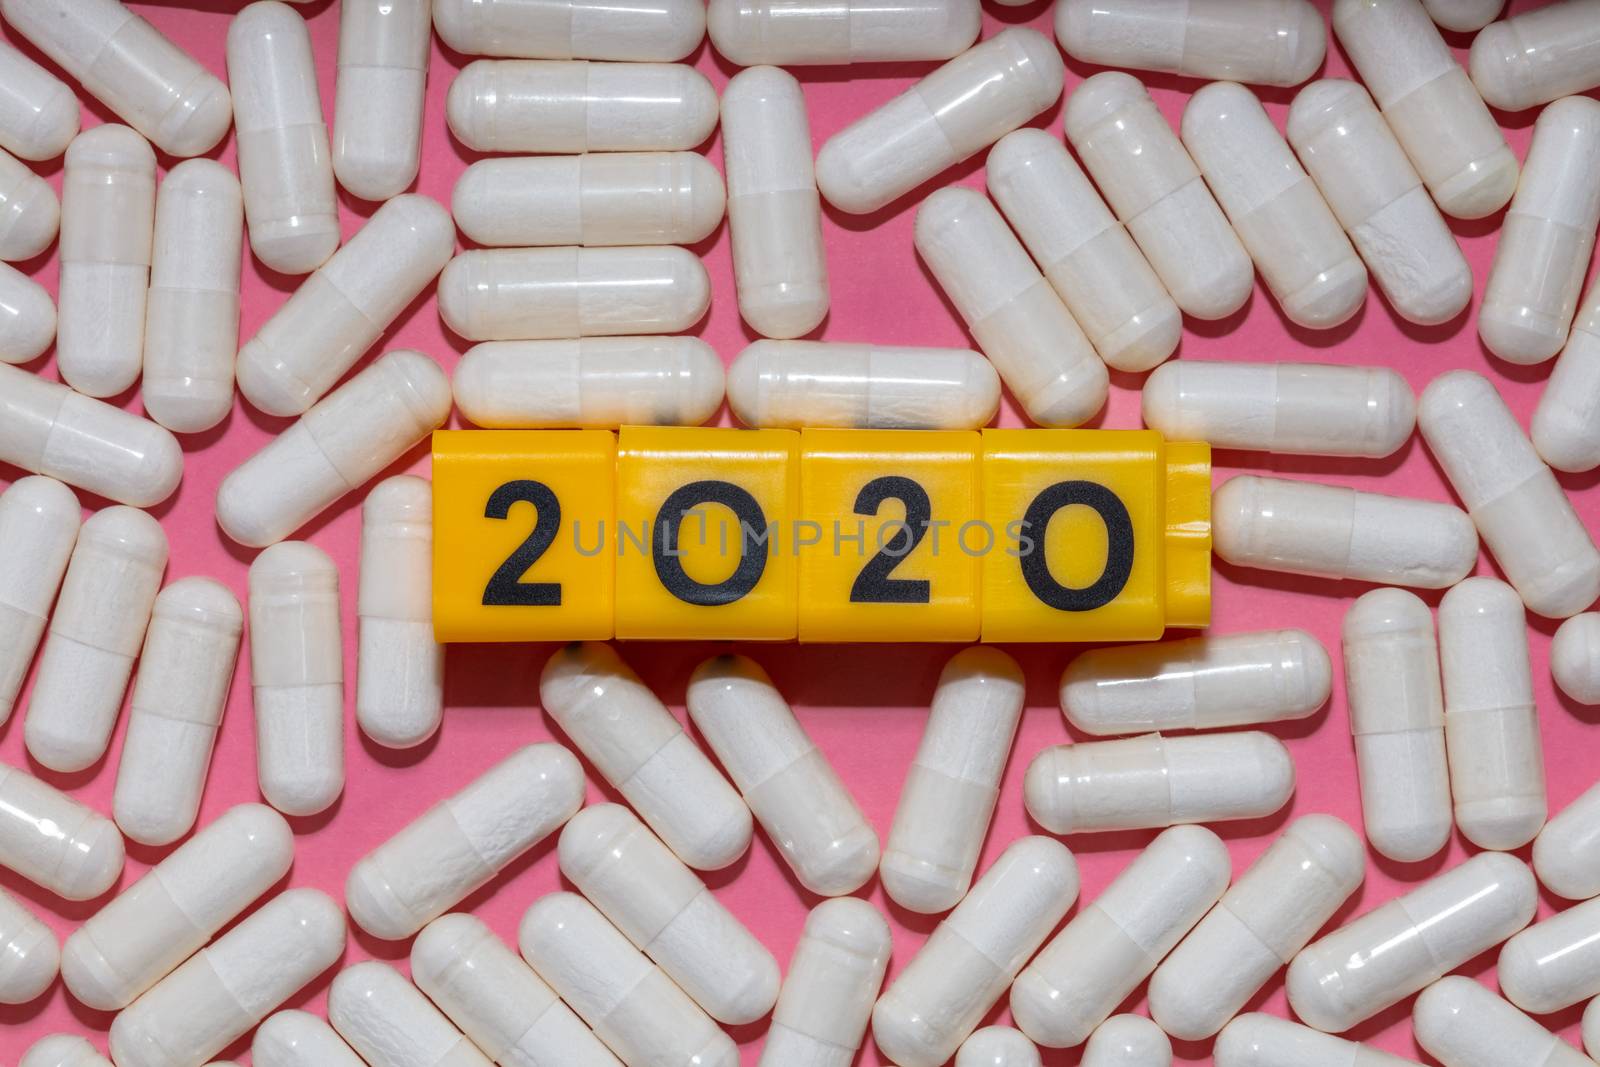 Top close up shot of white pills surrounding yellow cubes with black digits which form 2020 year. Pink background. Healthcare, medical and pharmaceutical concept. New normal and reality concept by DamantisZ